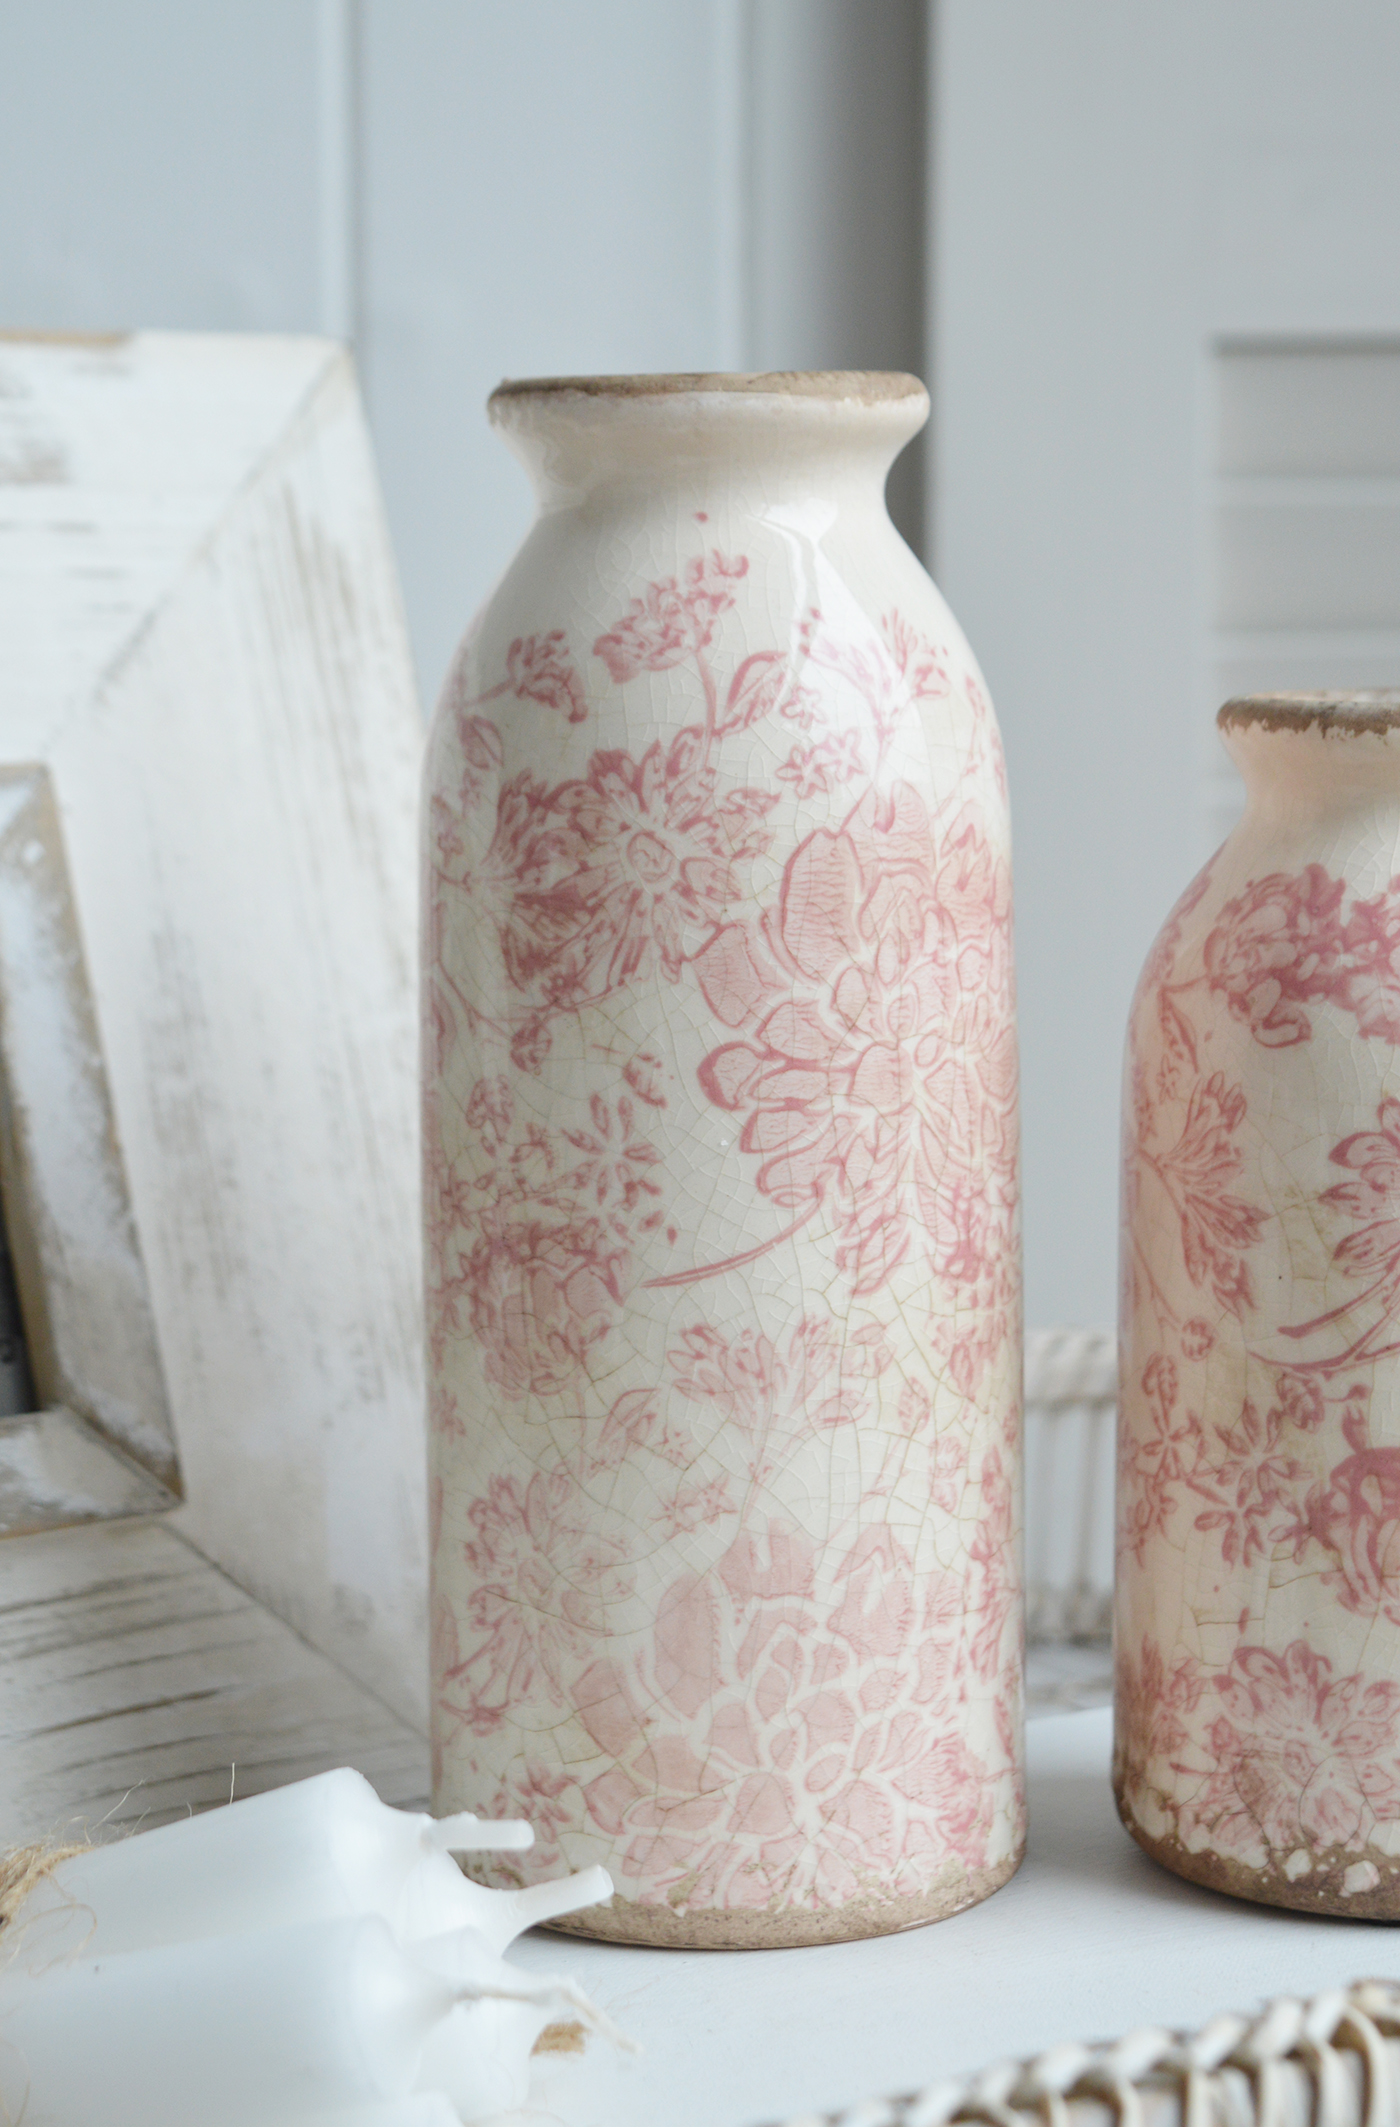 Tolland vintage pink ceramics for New England, farmhouse,  Country and coastal homes and interior decor to complement New England furniture